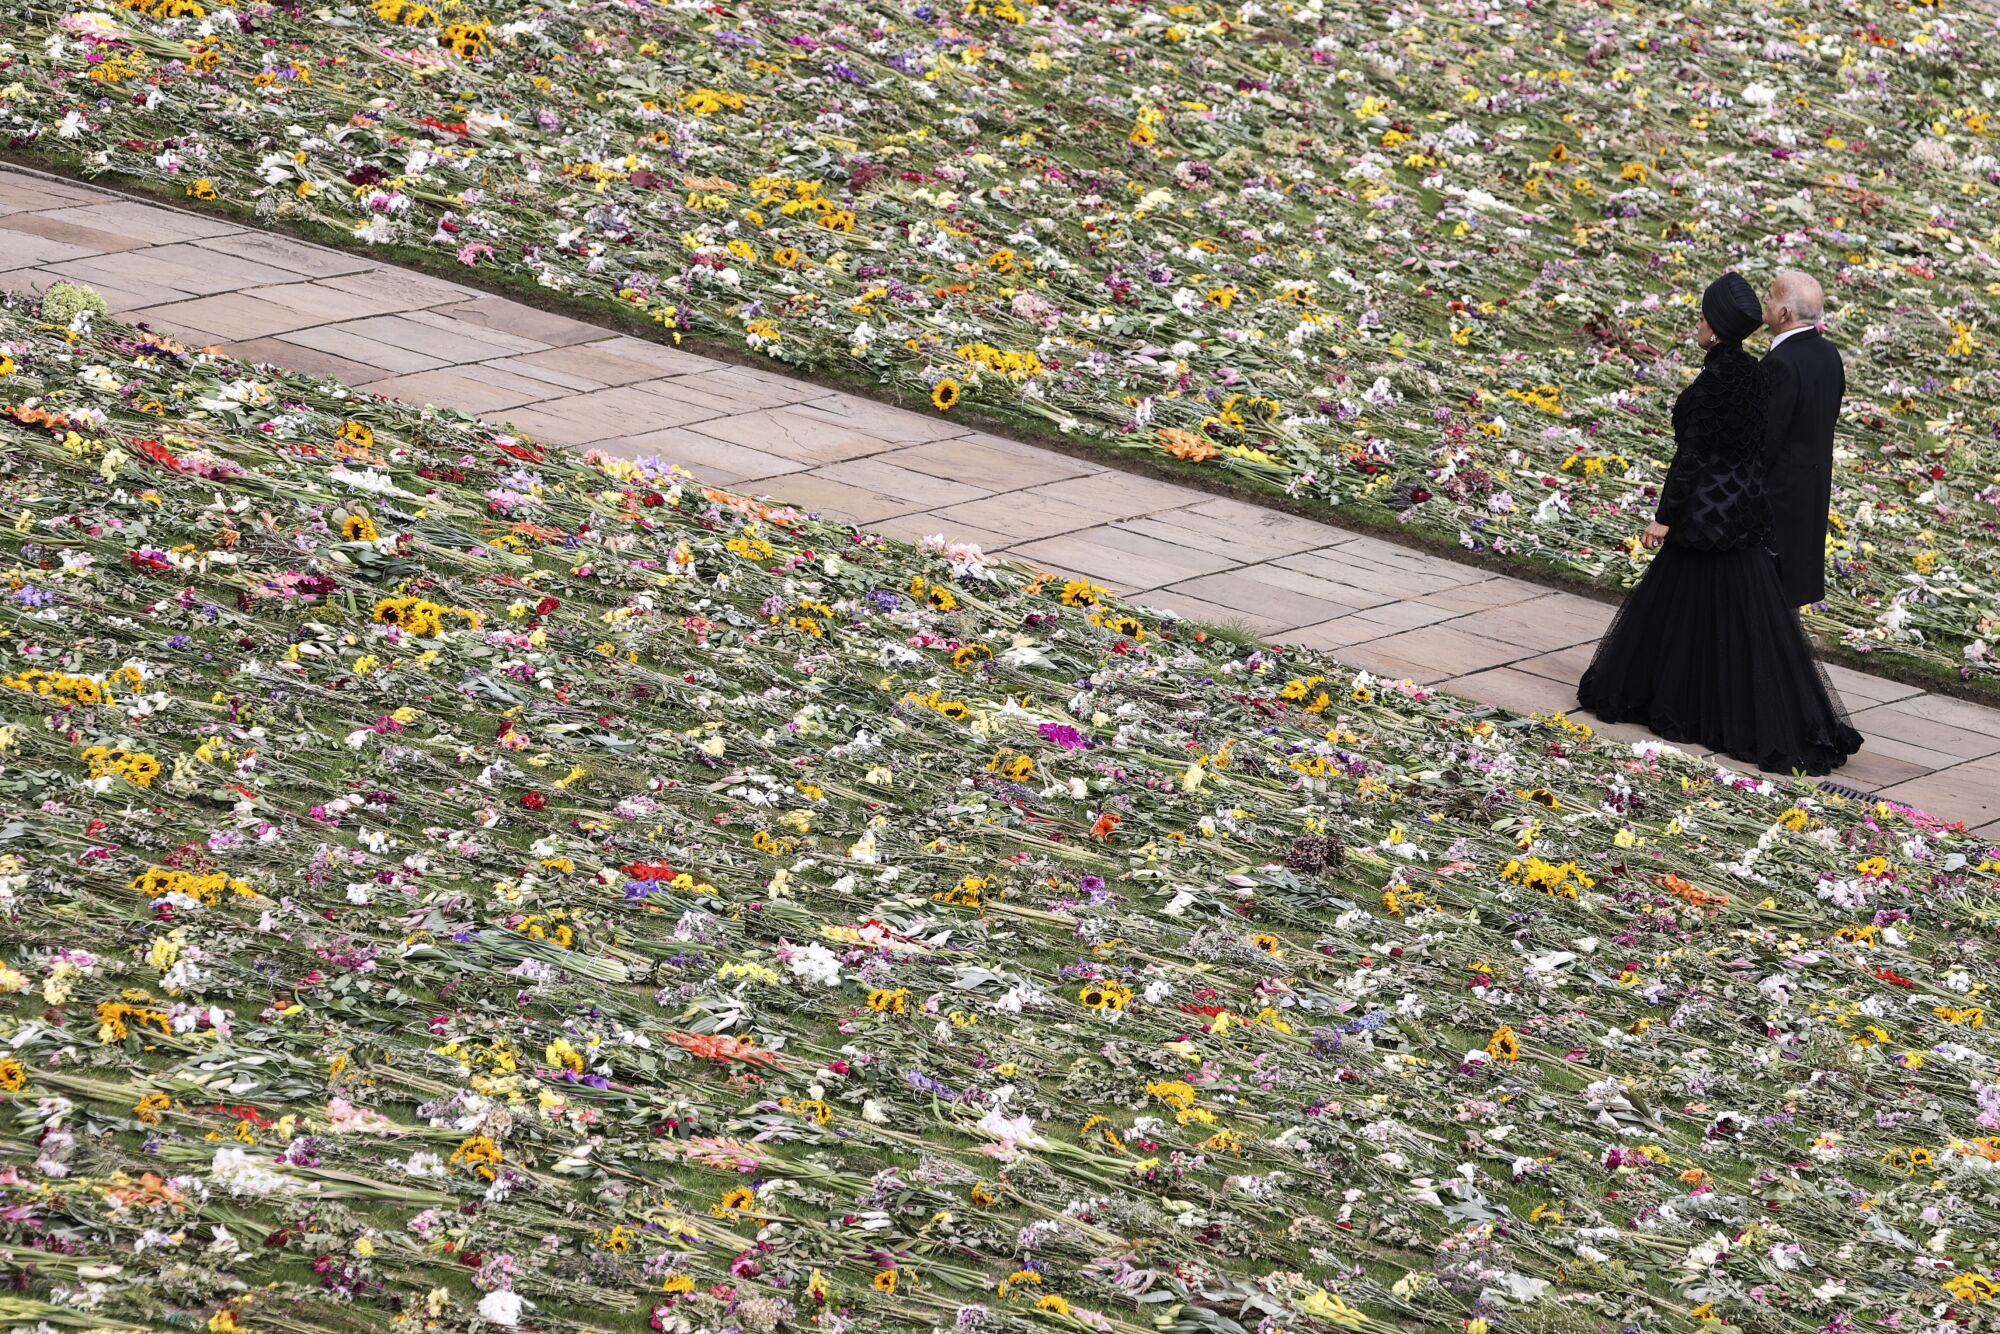 A man and a woman dressed in black are walking on a sidewalk along a lawn covered with flowers.